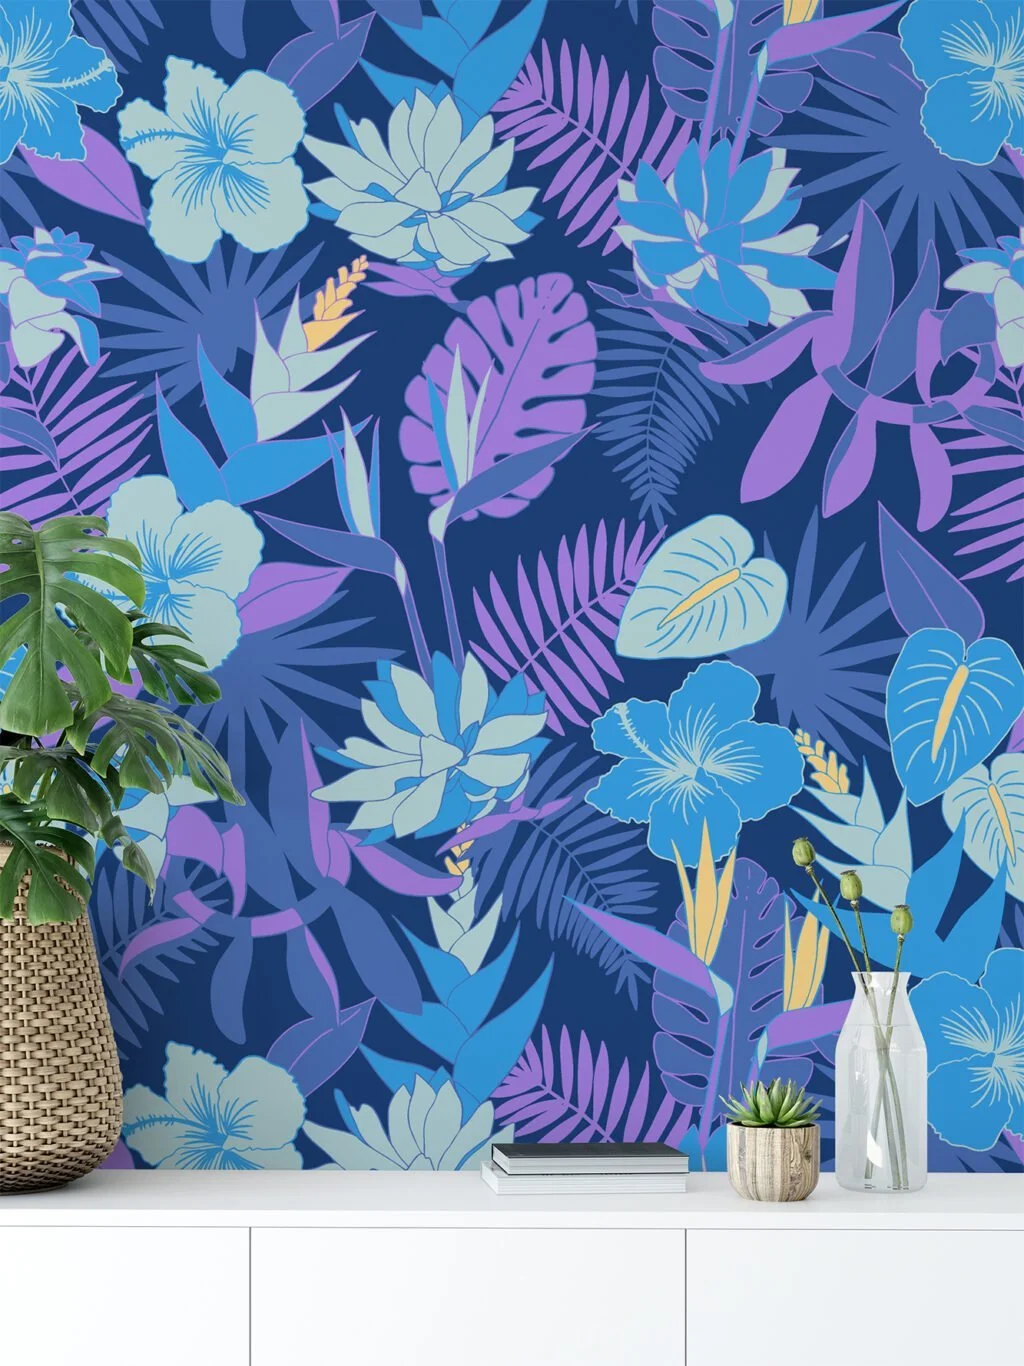 Blue And Purple Hued Floral Illustration Wallpaper, Vibrant Tropical Night Floral Peel & Stick Wall Mural